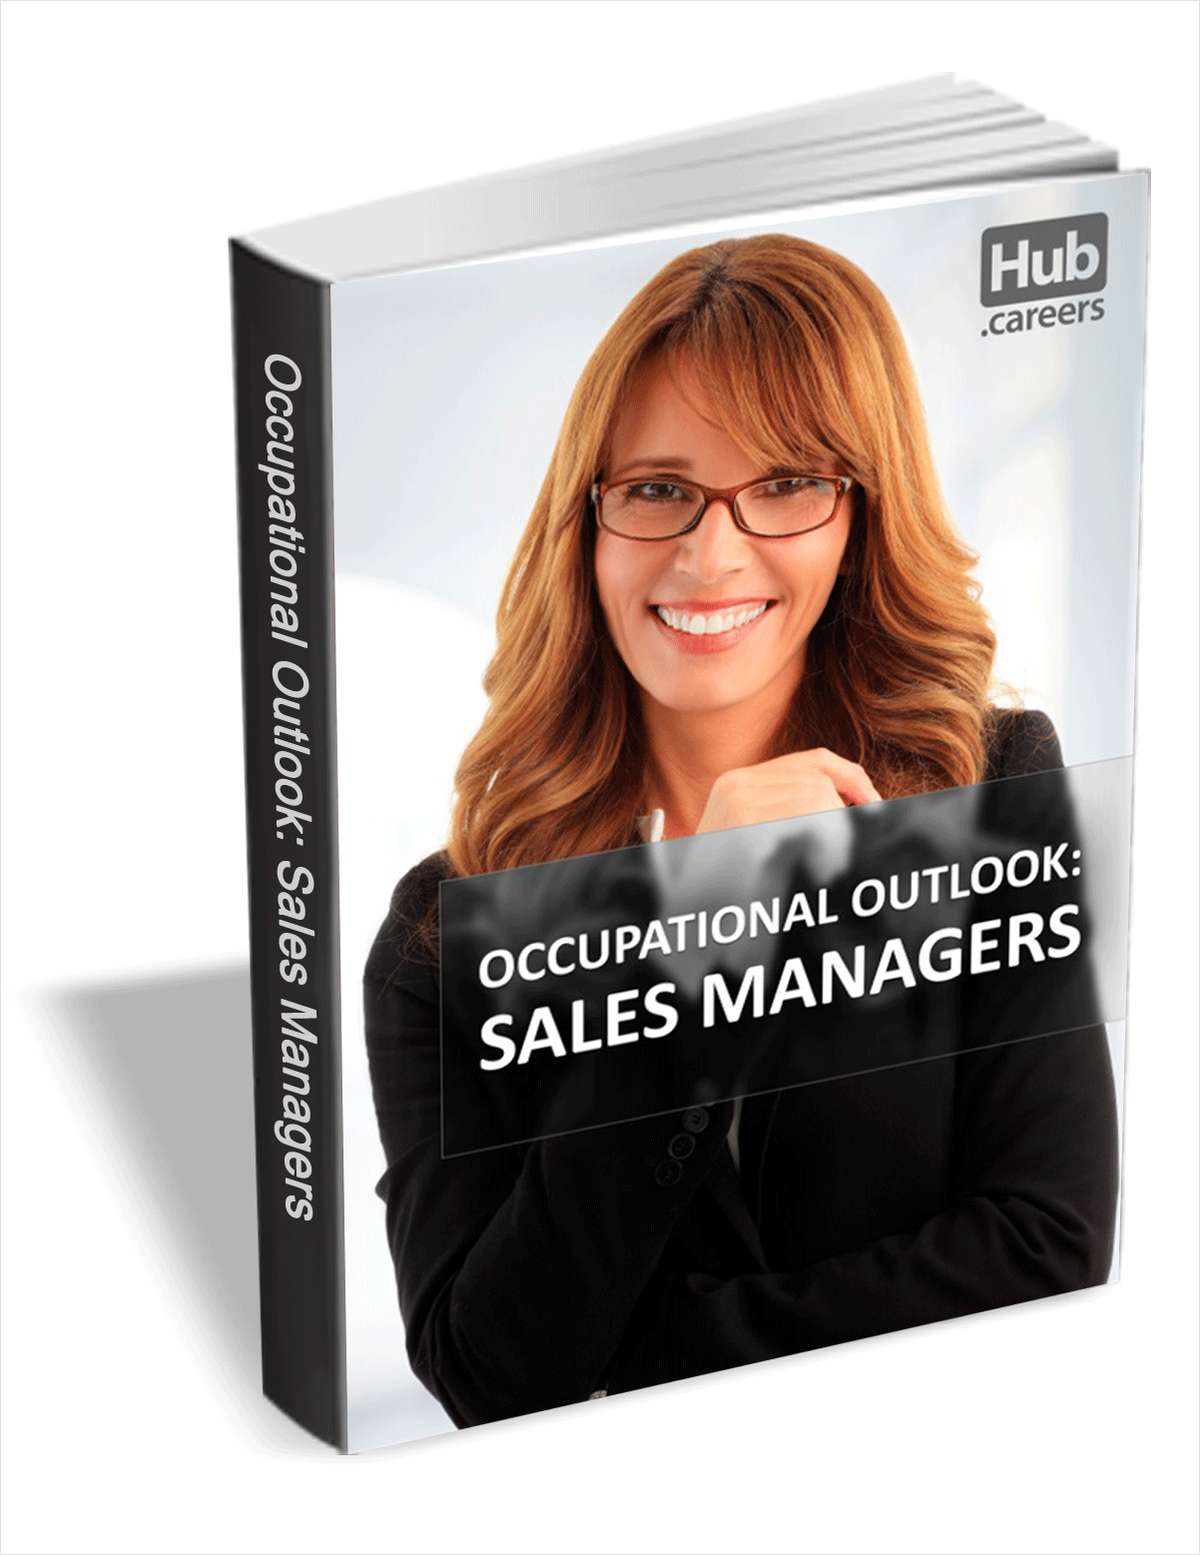 Sales Managers - Occupational Outlook